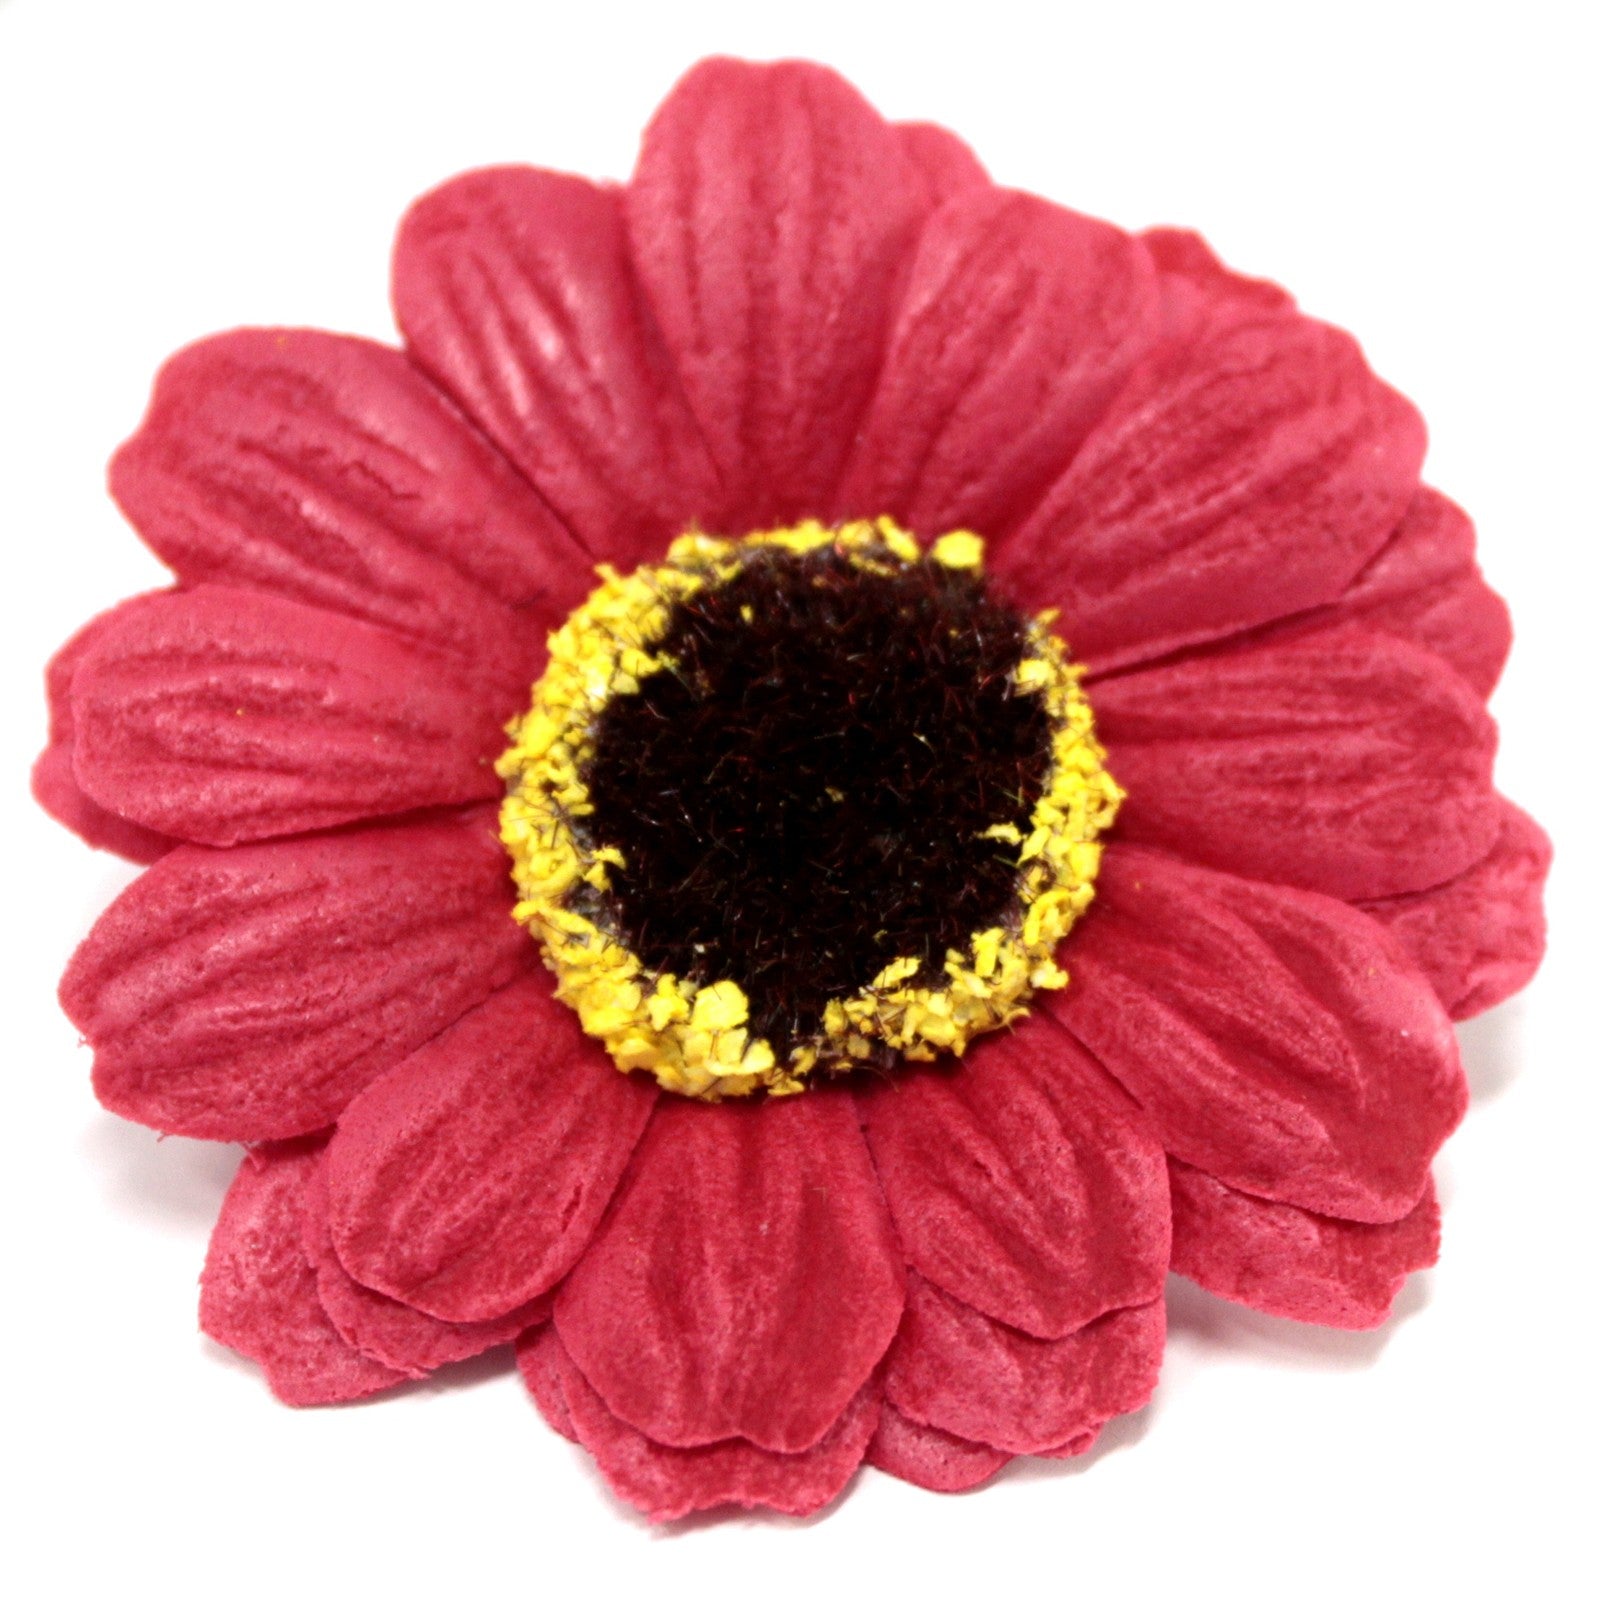 View Craft Soap Flowers Sml Sunflower Red x 10 pcs information